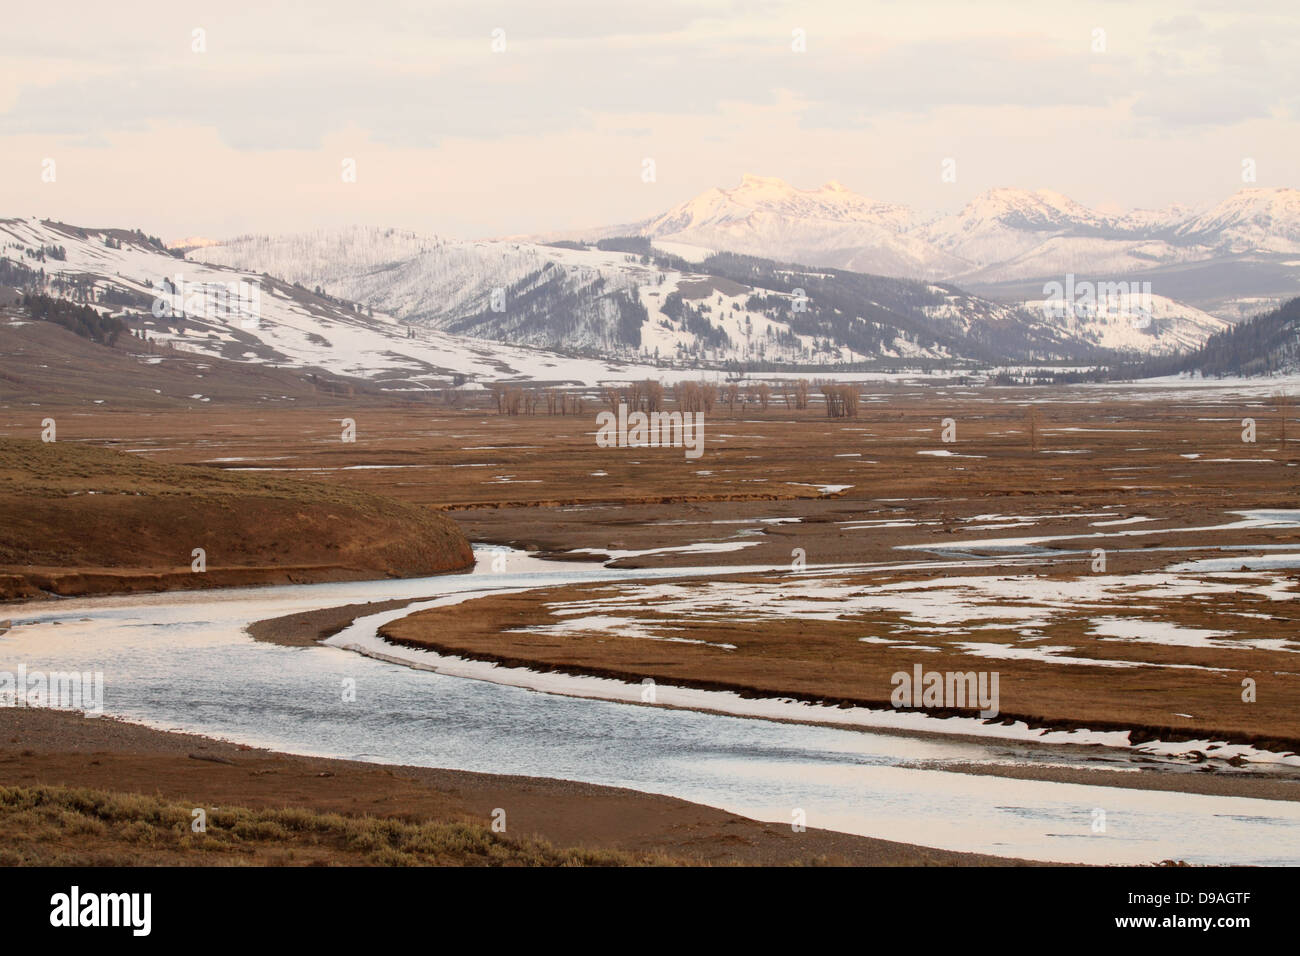 The Lamar River winding through the Lamar Valley beneath the Beartooth Mountains in northern Yellowstone National Park. Stock Photo